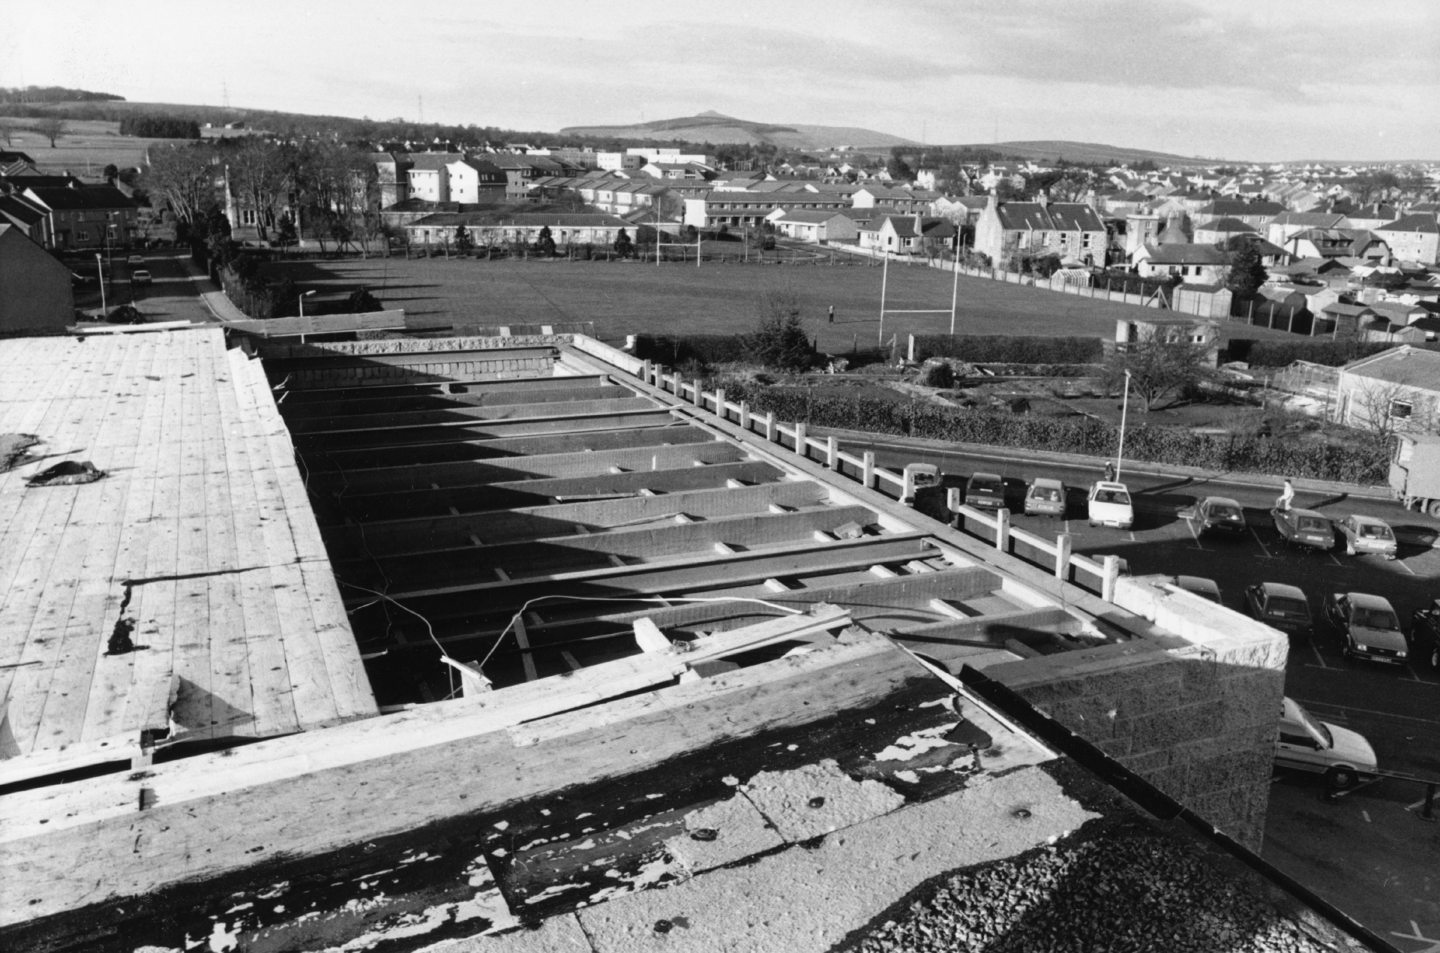 A section of the Inverurie Academy roof after being torn off